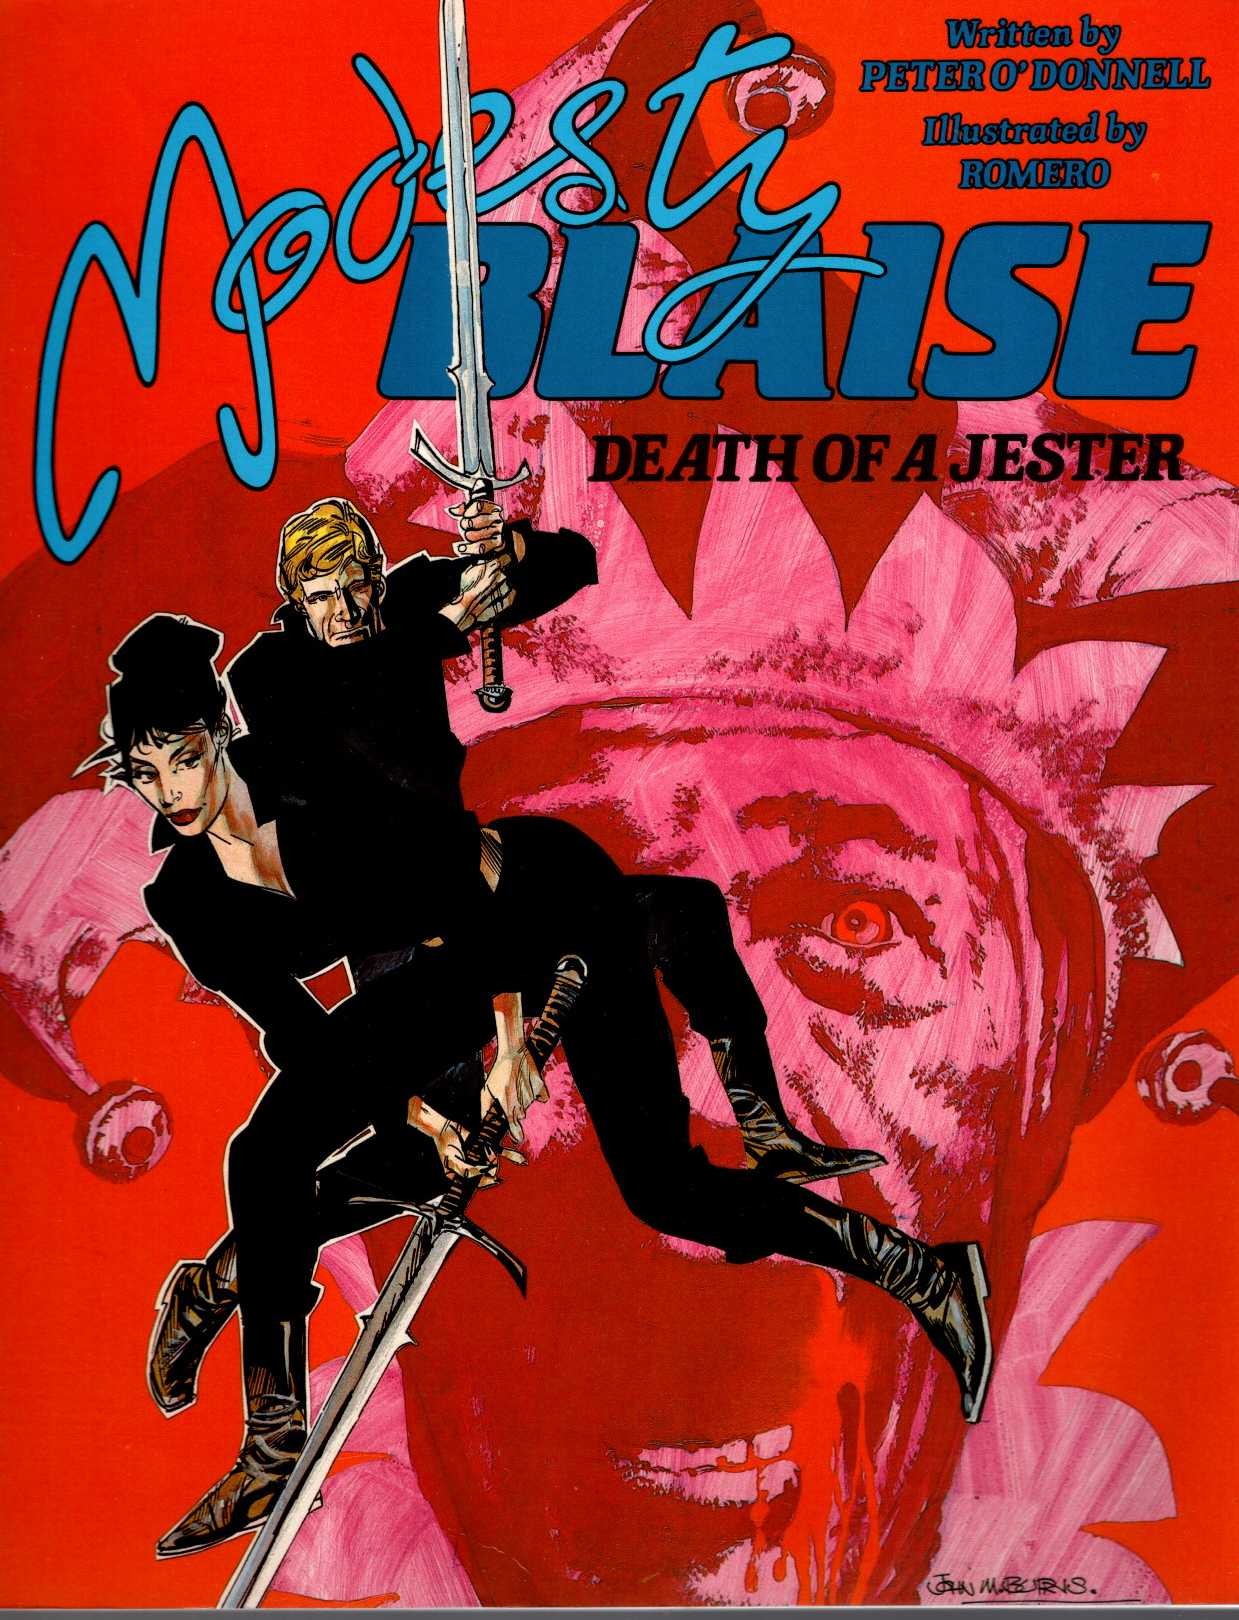 (Peter O'Donnell illustrated books) MODESTY BLAISE: DEATH OF A JESTER front book cover image